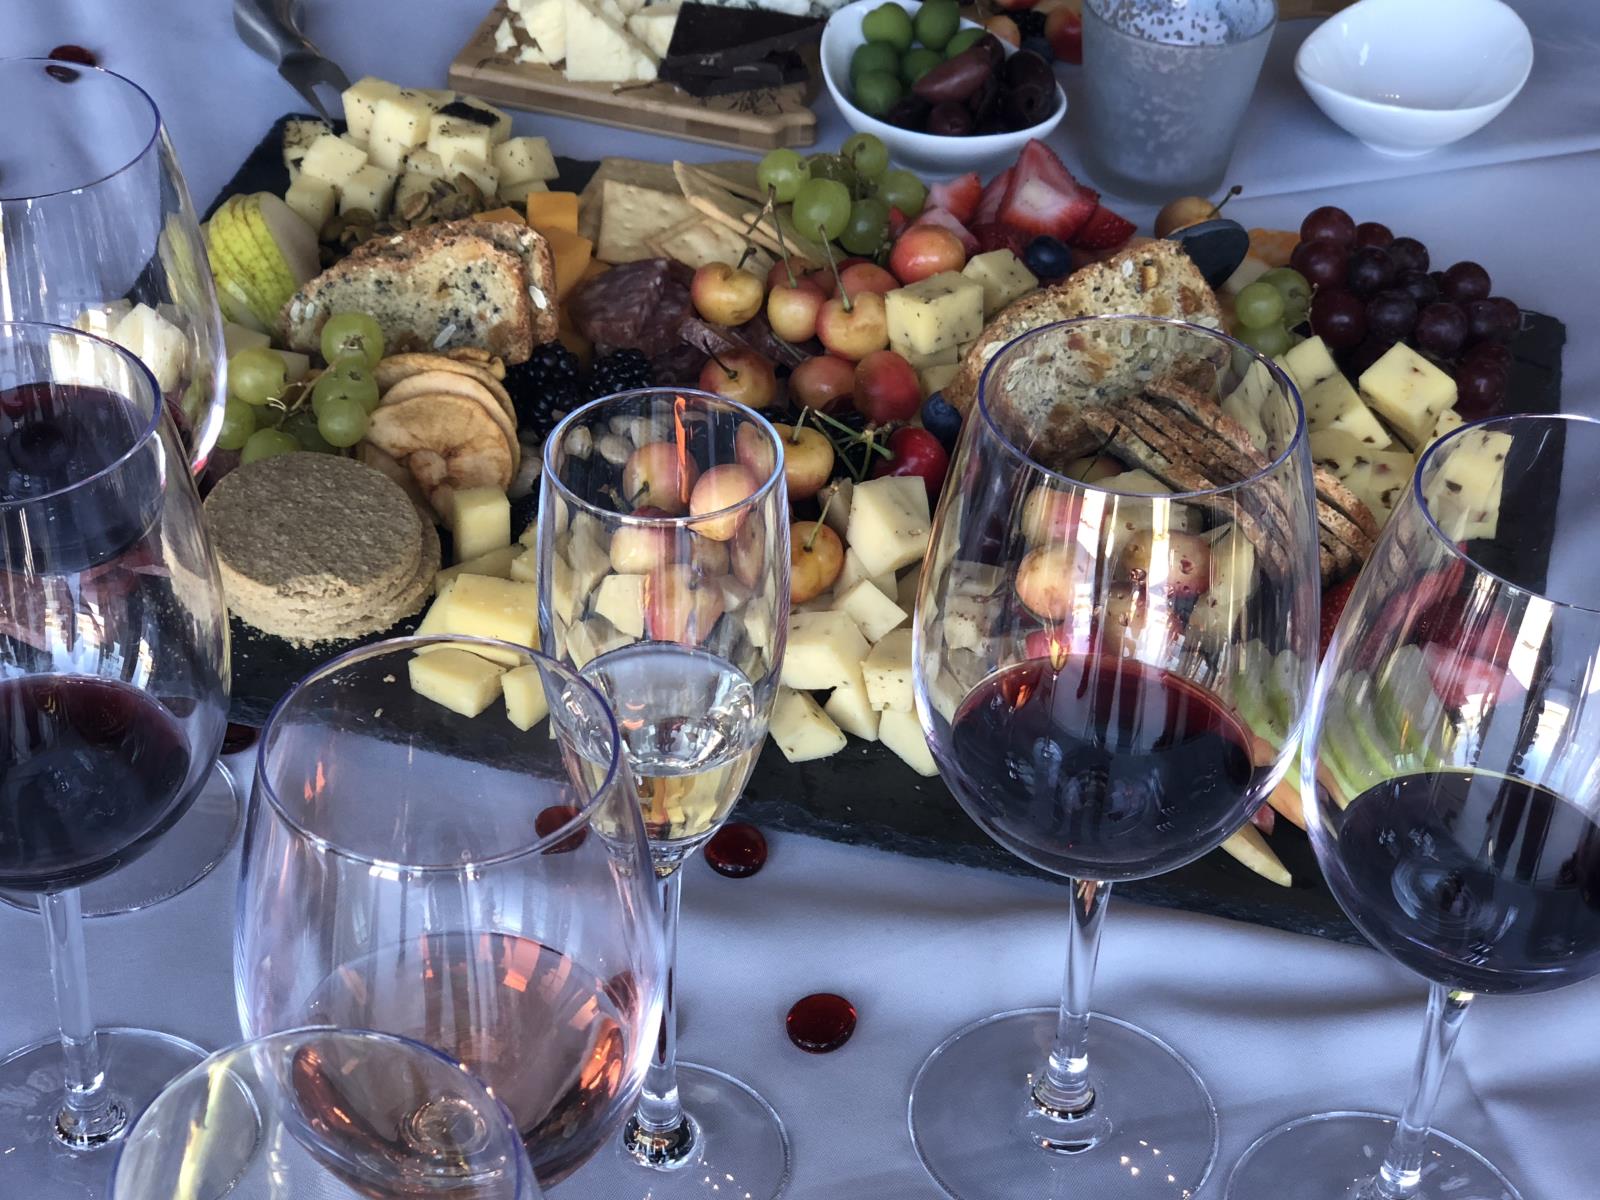 About 55 people with connections to the food industry participated in a June 13 wine and cheese event designed to showcase both commodities and the important role they play in Idaho’s economy.